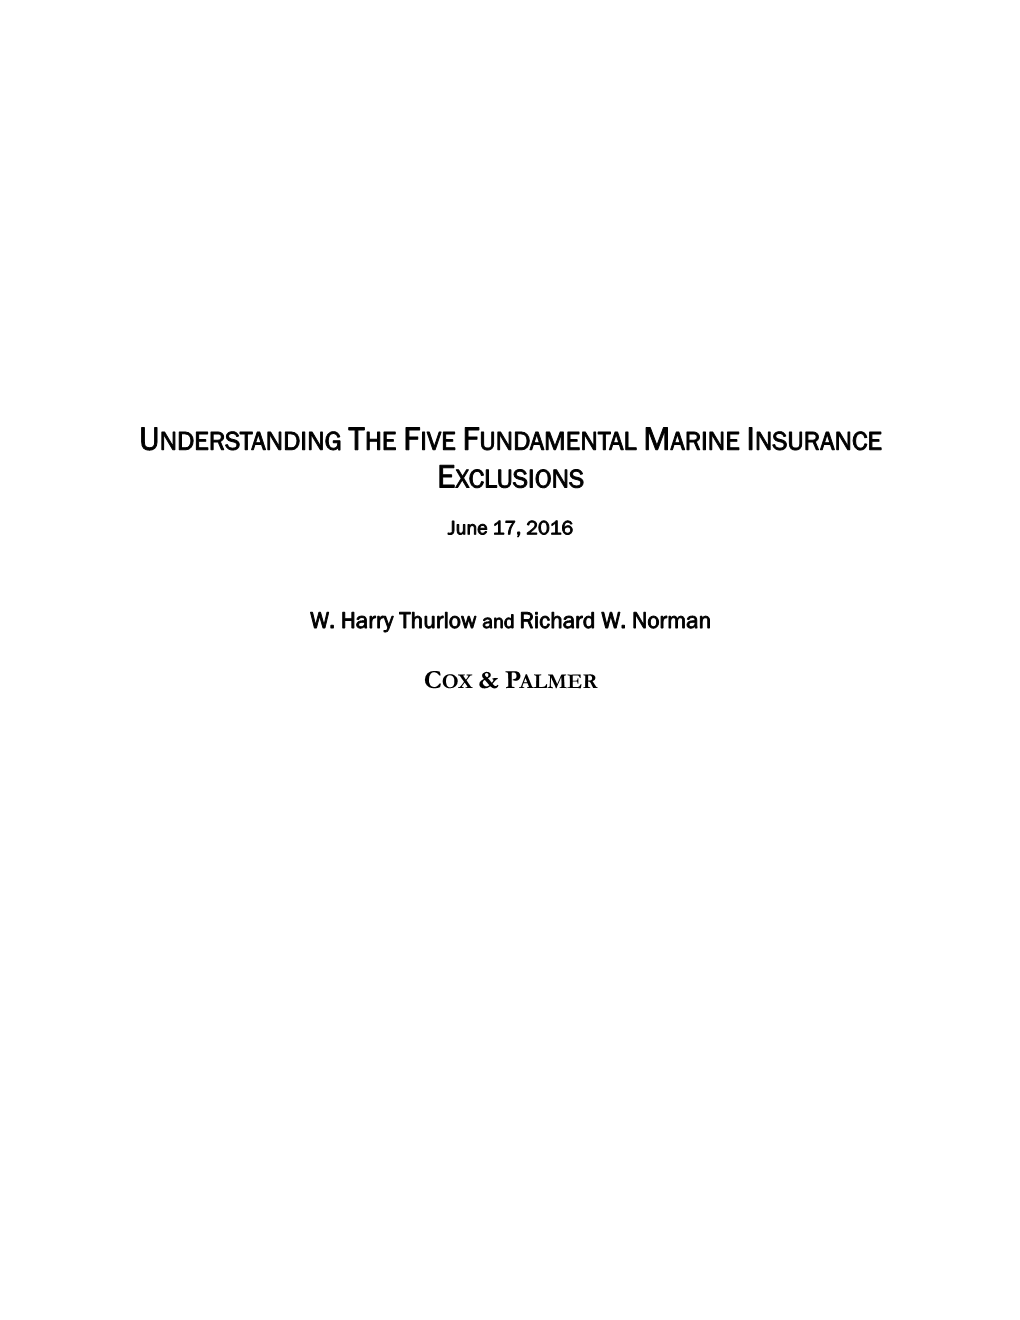 Understanding the Five Fundamental Marine Insurance Exclusions